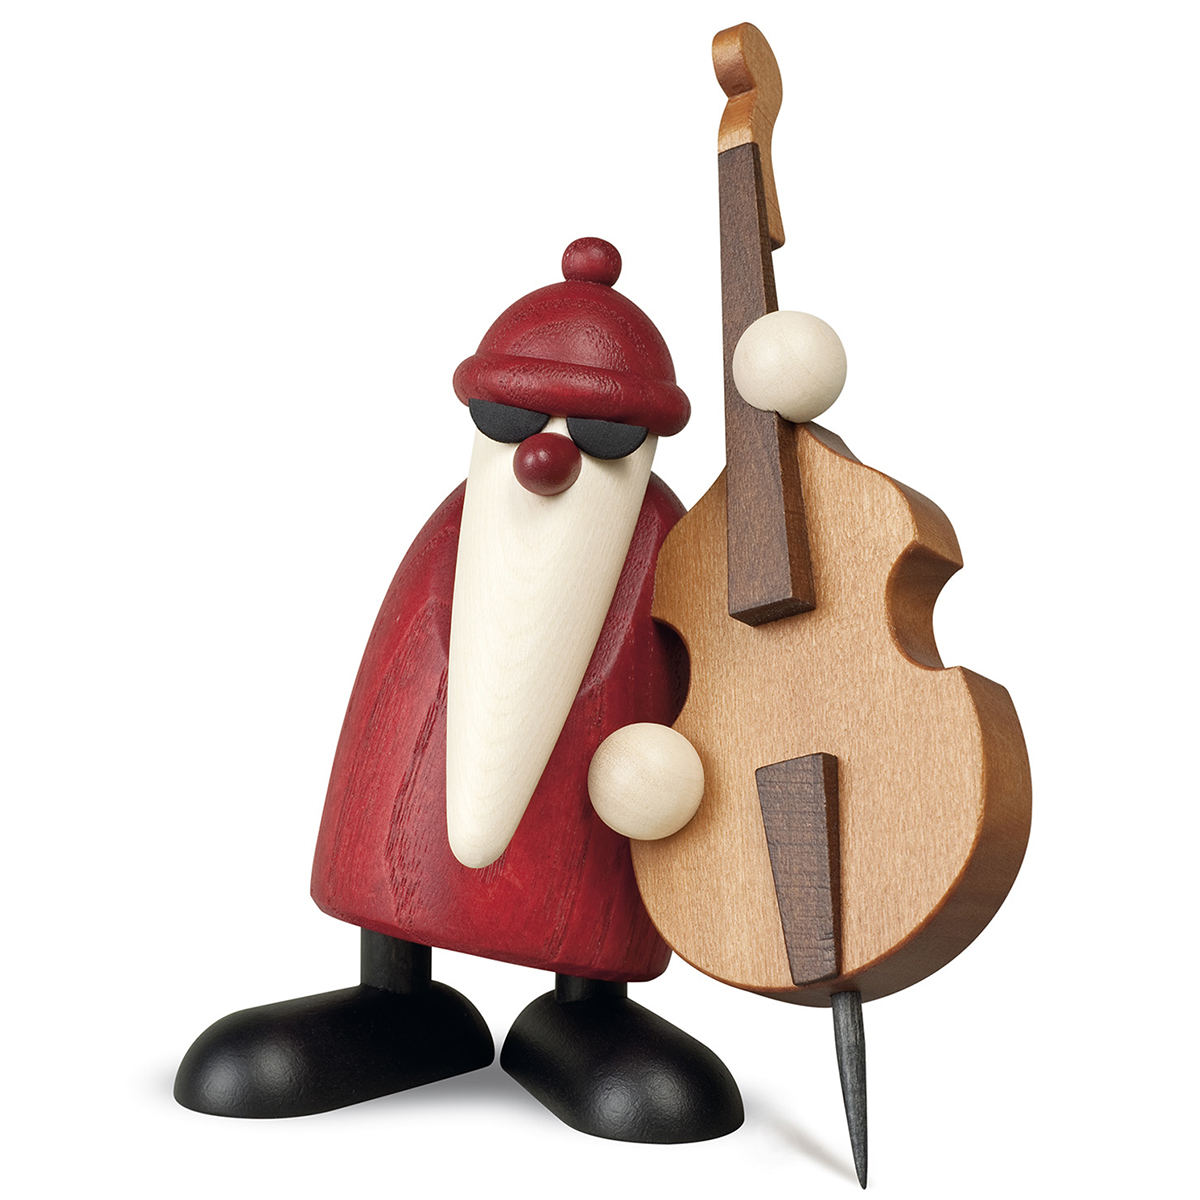 Santa Claus playing the double bass